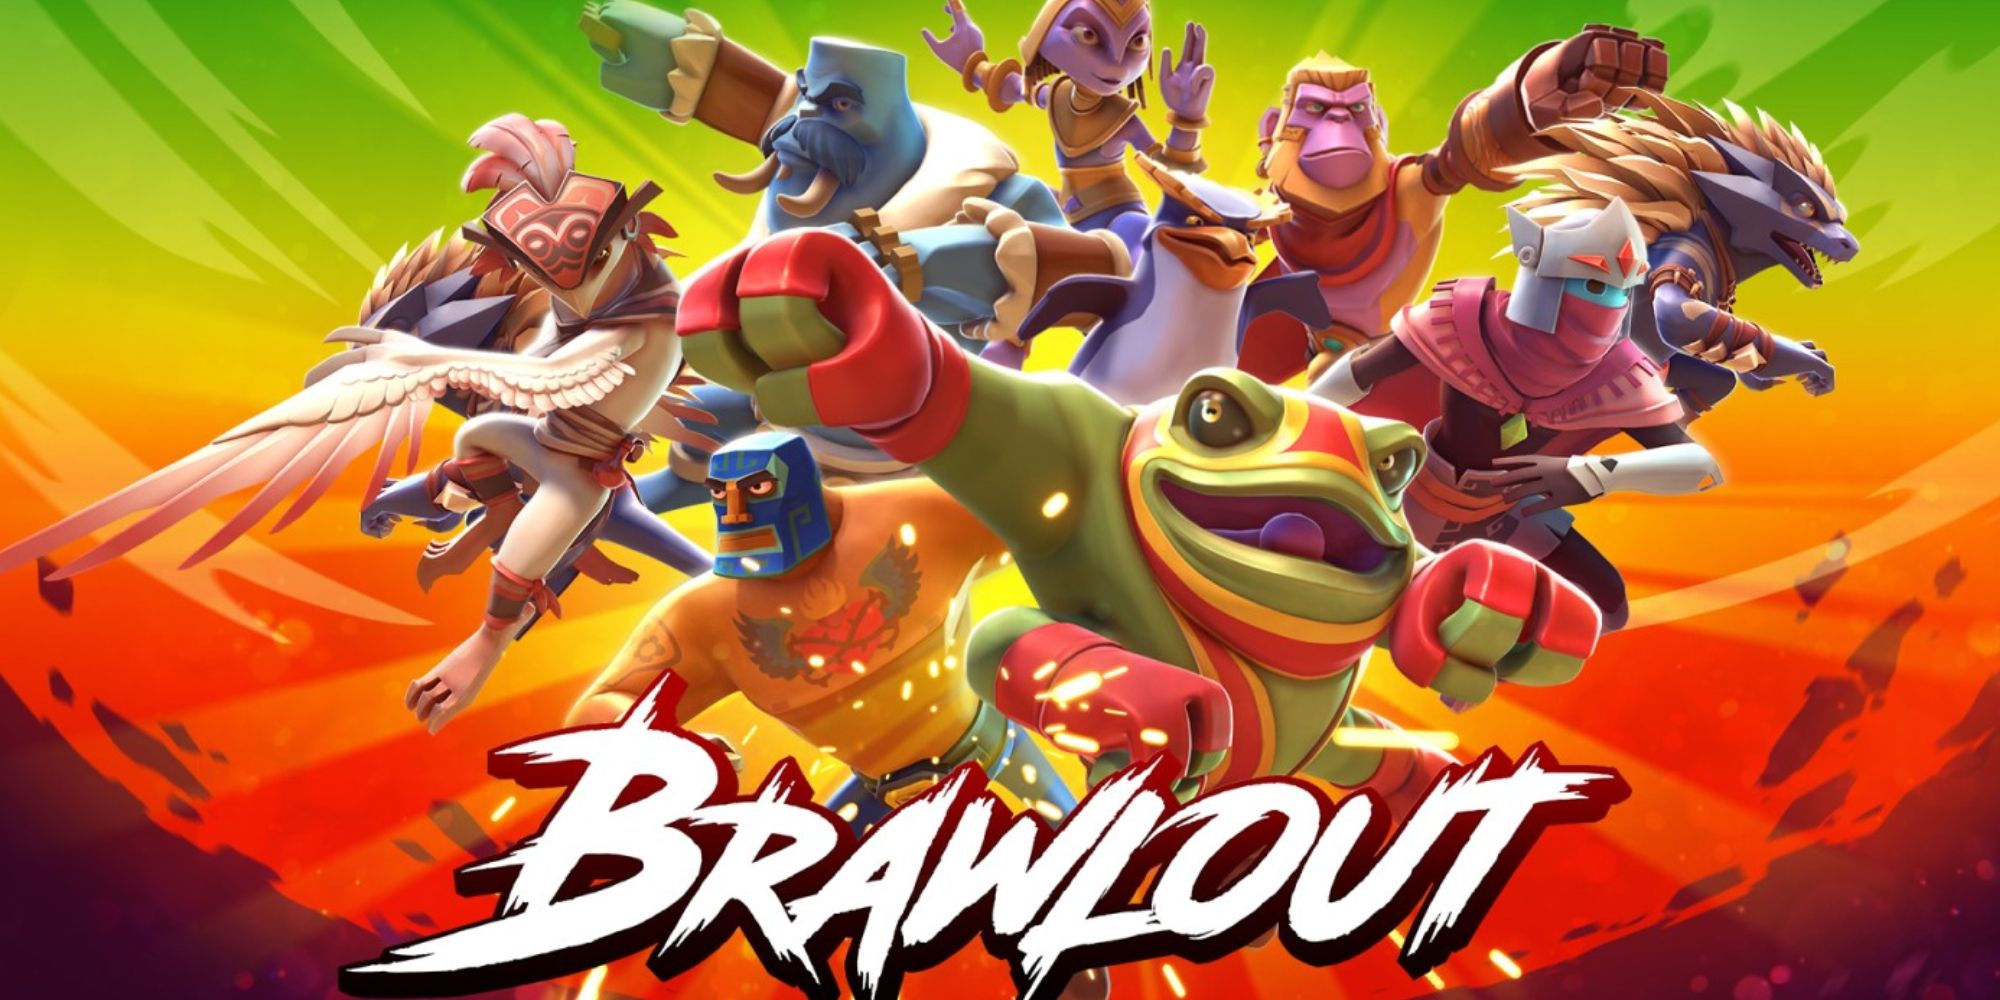 a promotional image for Brawlout with the game's logo at the bottom and its roster of characters grouped in the centre including Jaun from Guacamelee and the Drifter from Hyperlight Drifter